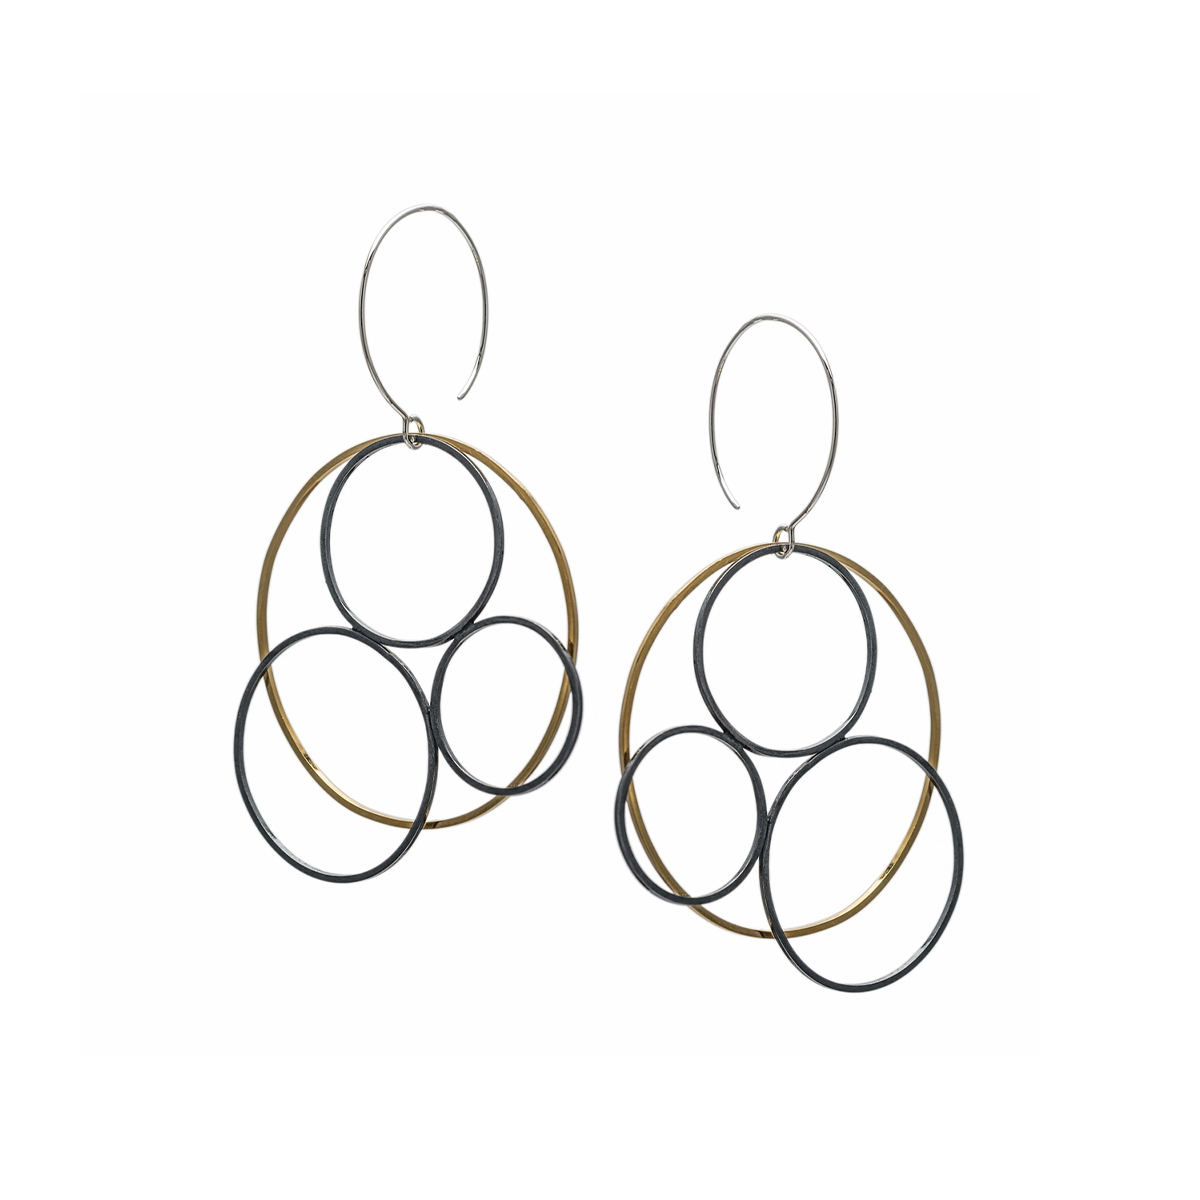 Oxidized Sterling Silver and Gold Plated Multi Circle Earrings